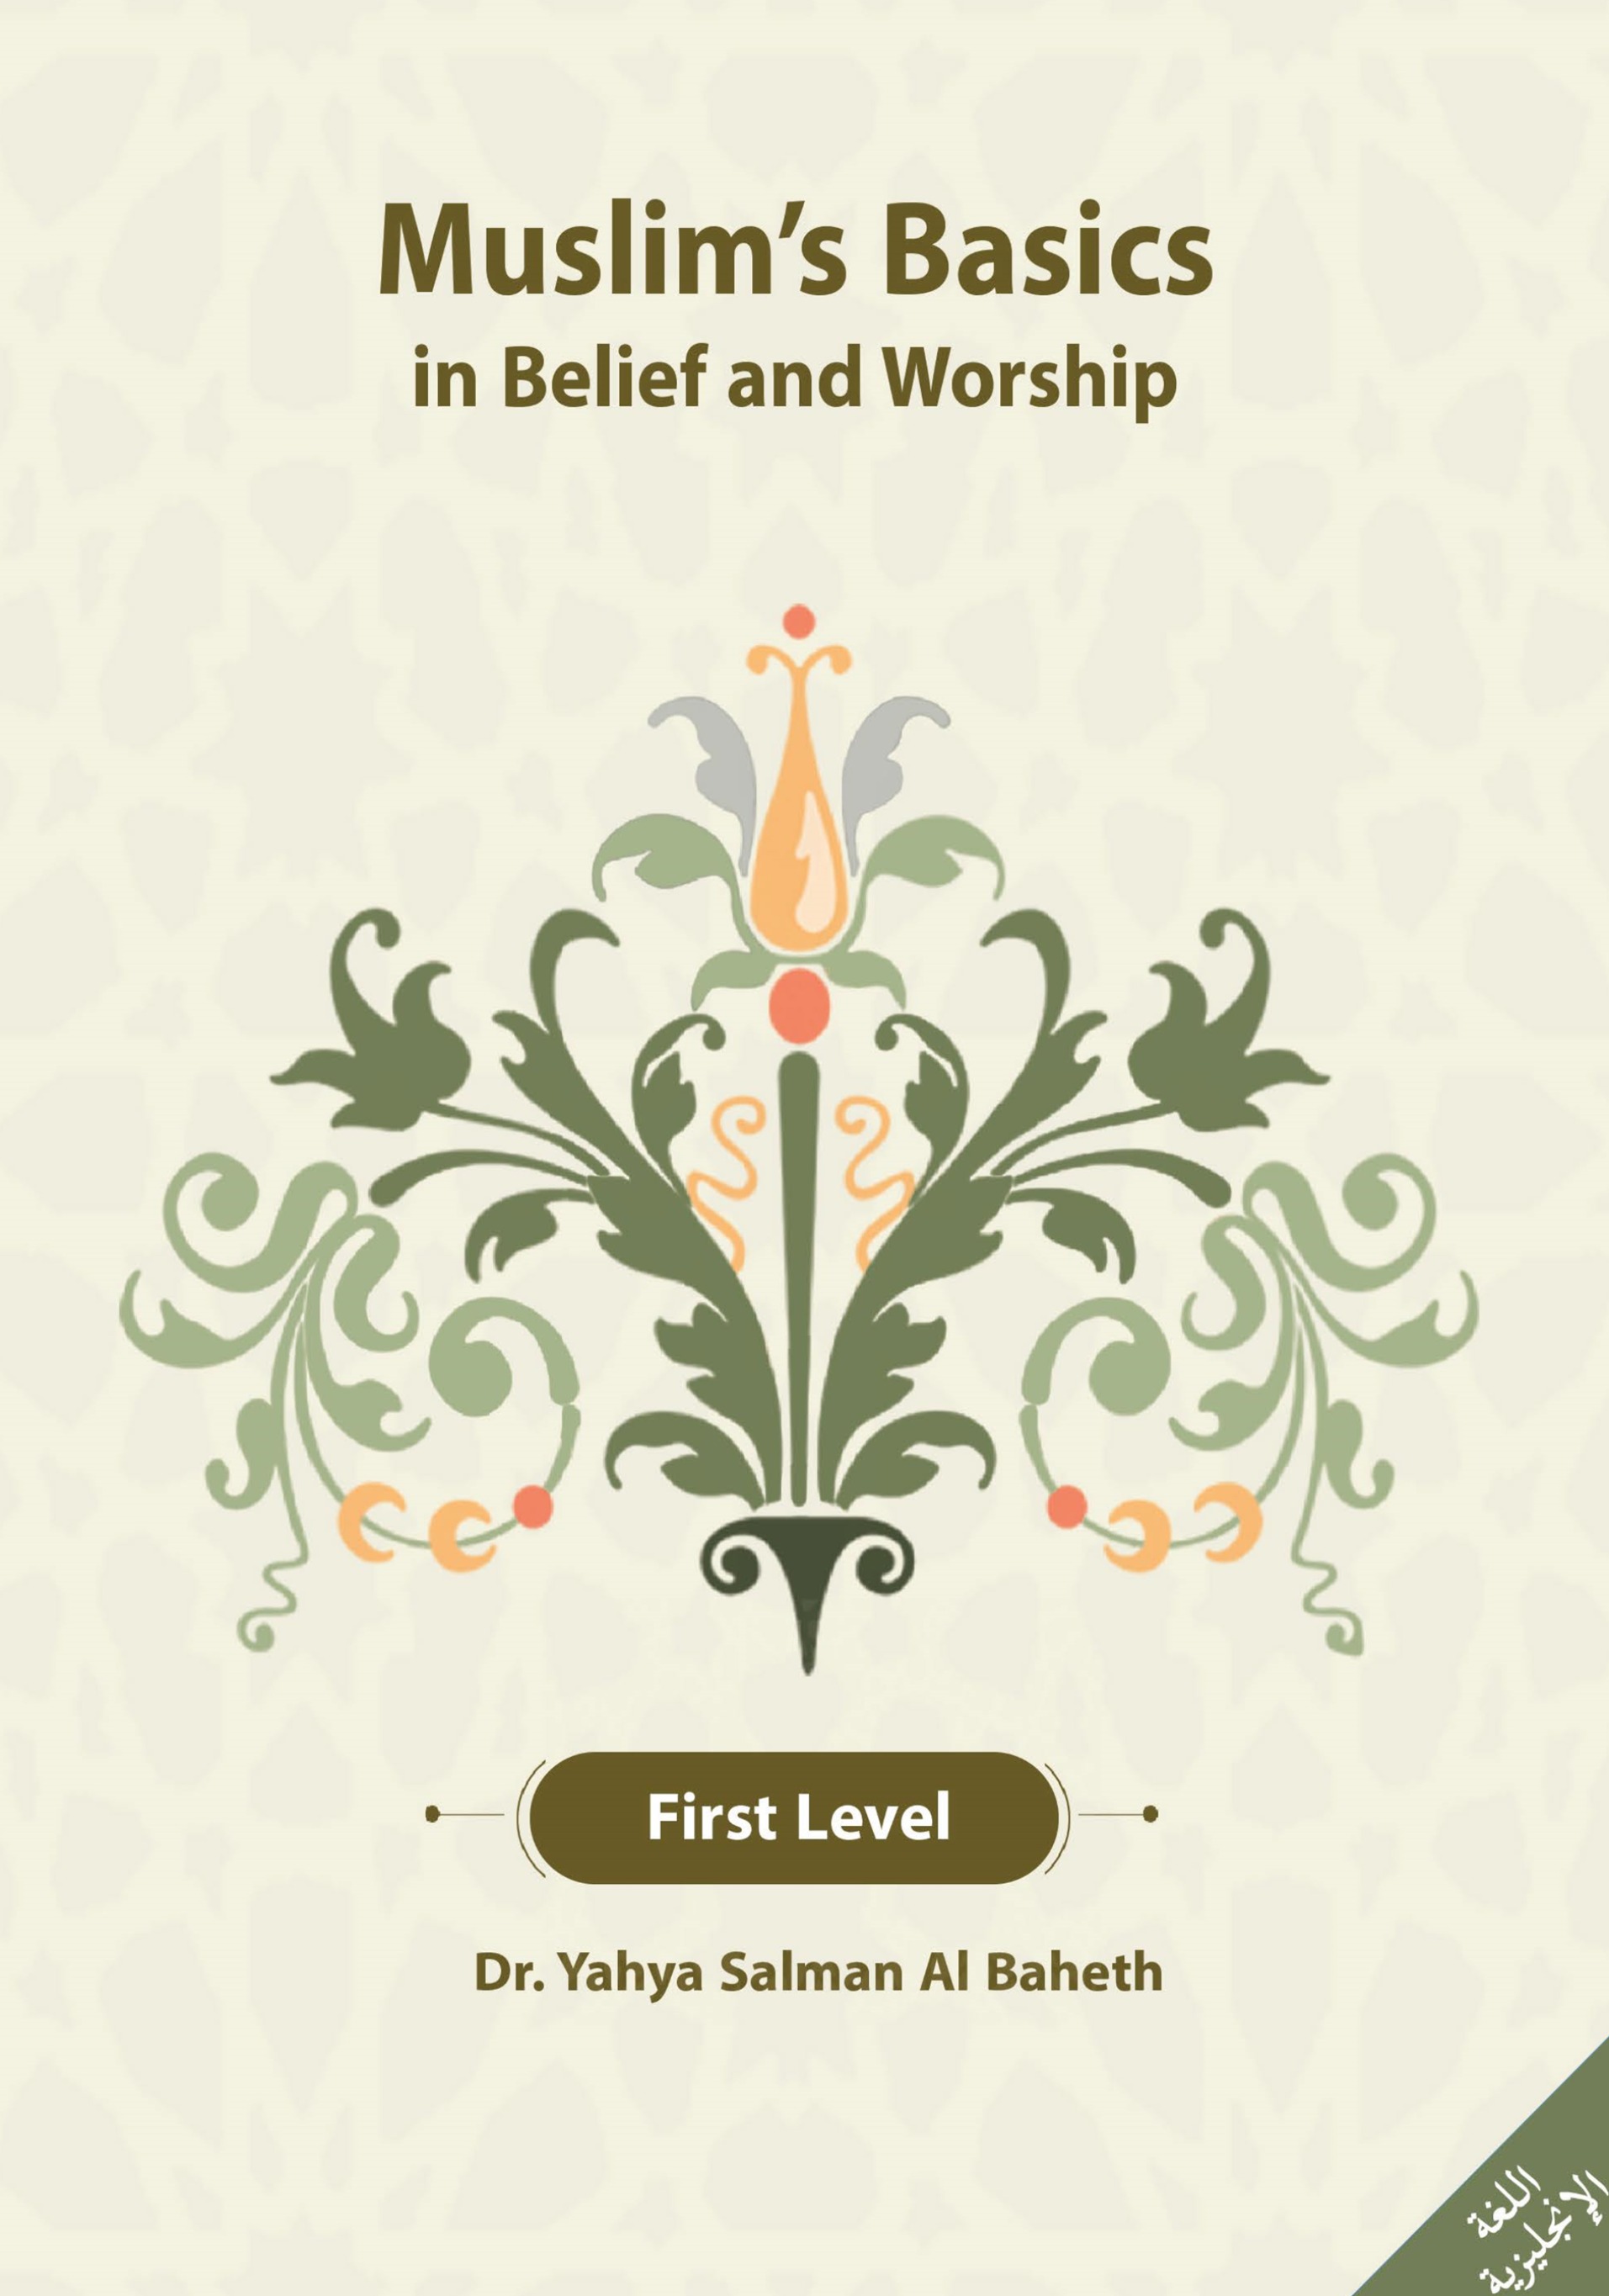 Muslim's Basics in Belief and Worship-part 1